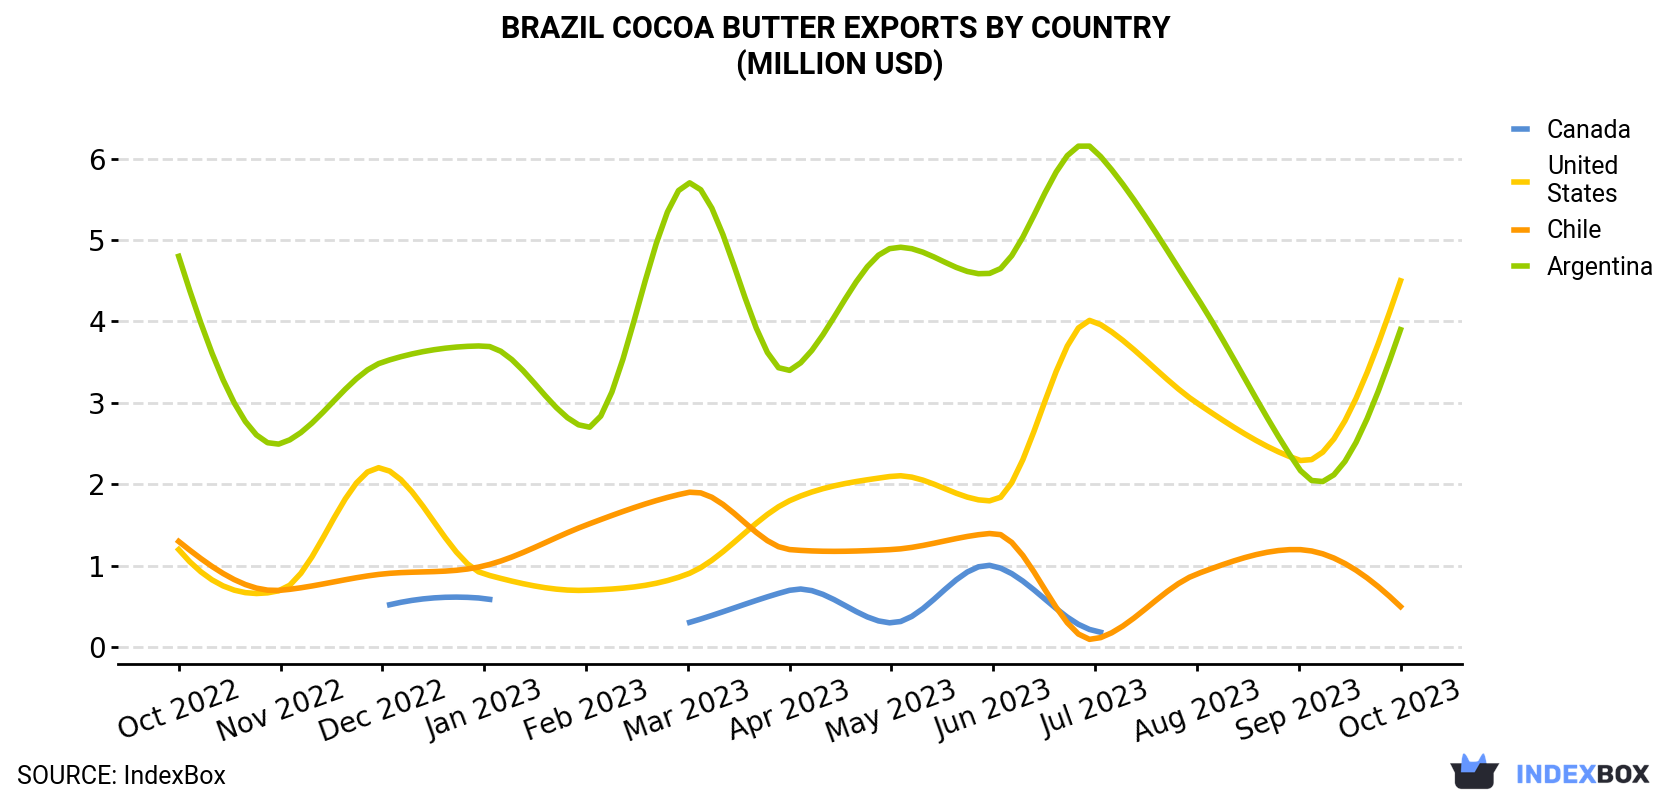 Brazil Cocoa Butter Exports By Country (Million USD)